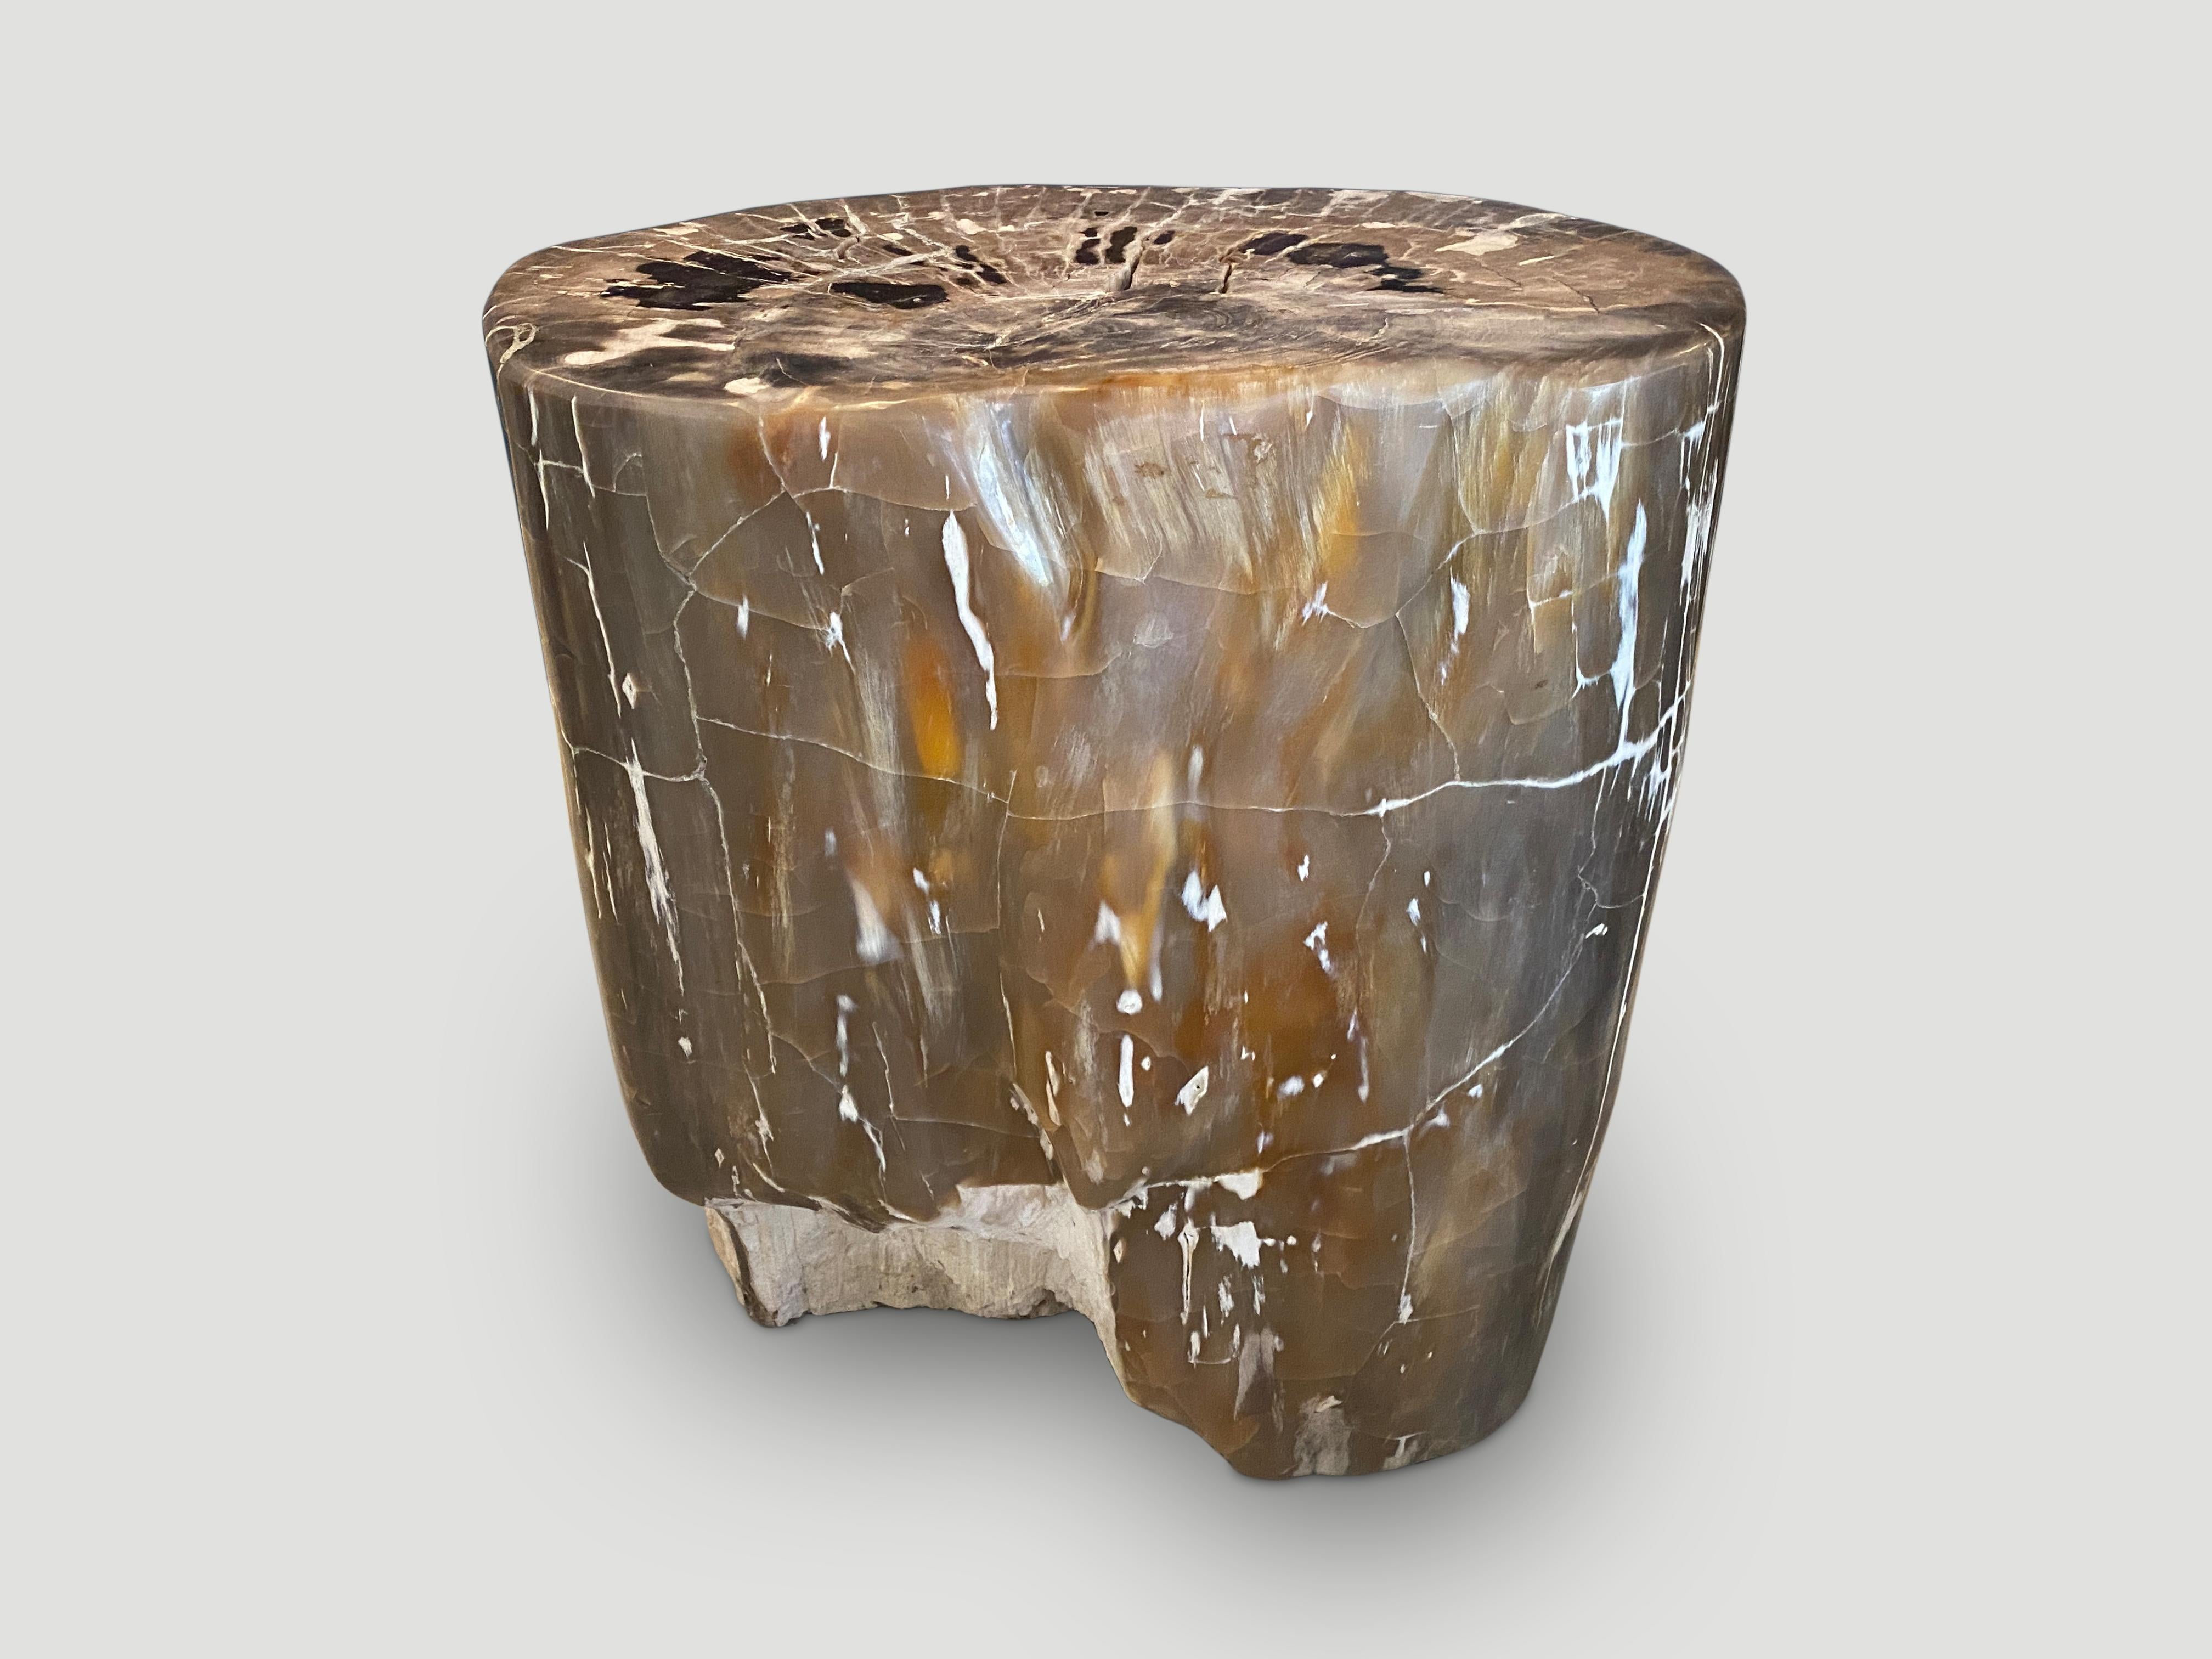 Impressive beautiful contrasting tones and textures in this ancient petrified wood side table. It’s fascinating how Mother Nature produces these exquisite 40 million year old petrified teak logs with such contrasting colors and natural patterns